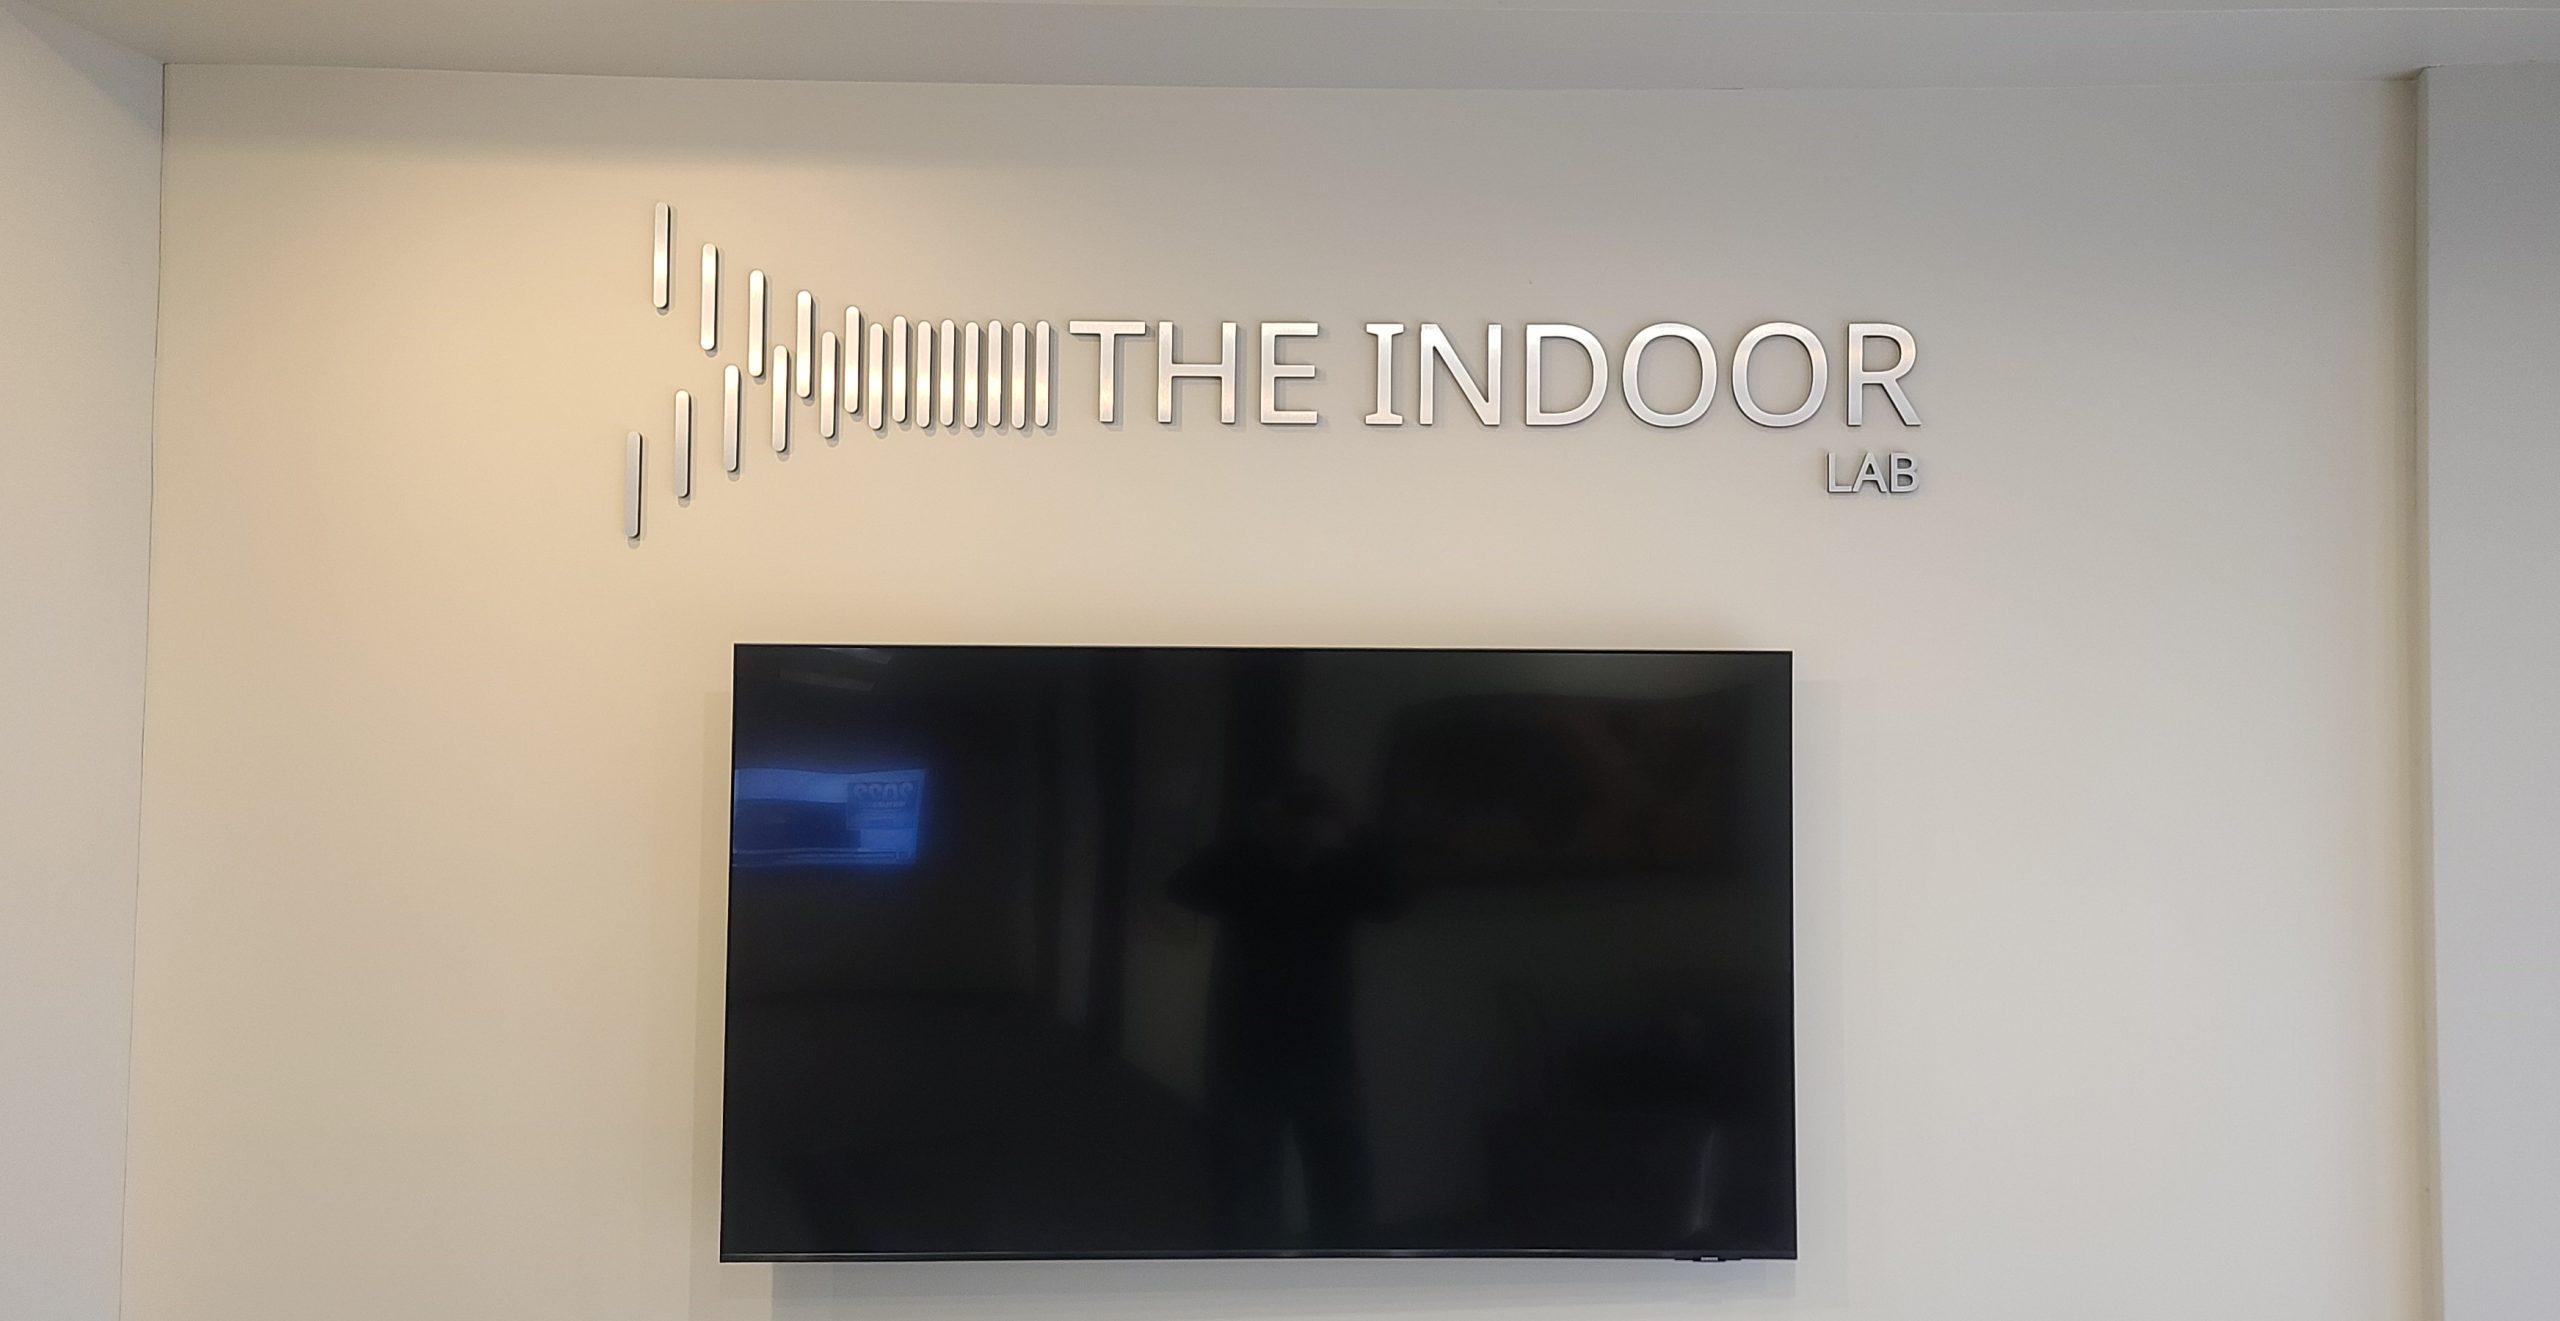 This is the lobby sign composed of acrylic in polished gold faces we fabricated and installed for The Indoor Lab in Irvine.